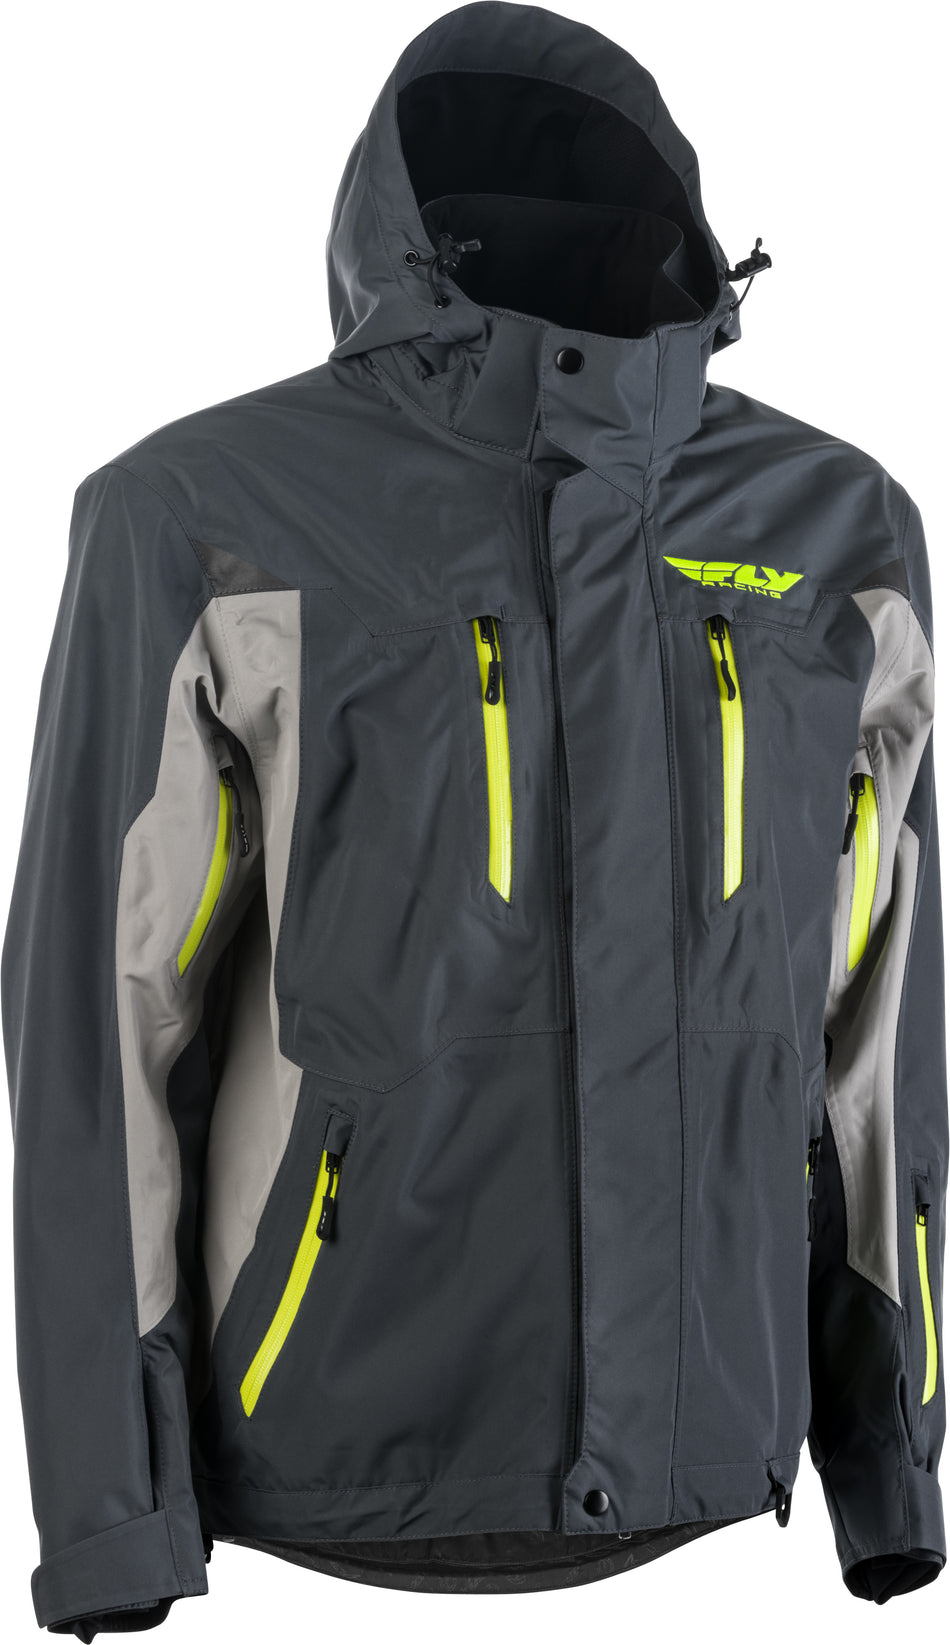 FLY RACING Fly Incline Jacket Grey/Charcoal Sm 470-4101S